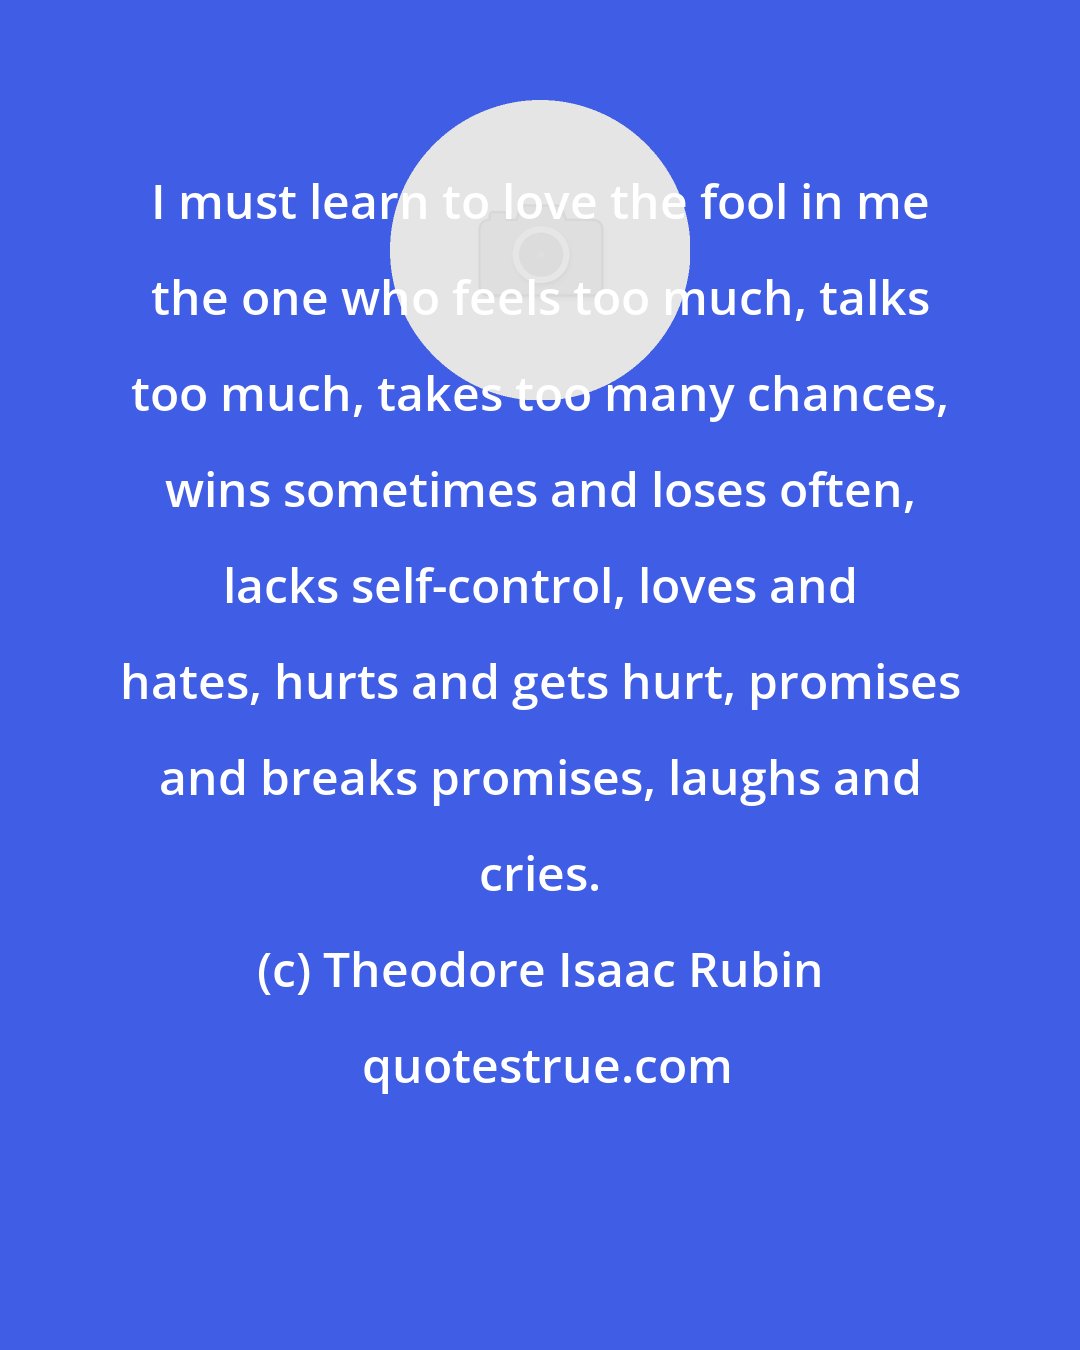 Theodore Isaac Rubin: I must learn to love the fool in me the one who feels too much, talks too much, takes too many chances, wins sometimes and loses often, lacks self-control, loves and hates, hurts and gets hurt, promises and breaks promises, laughs and cries.